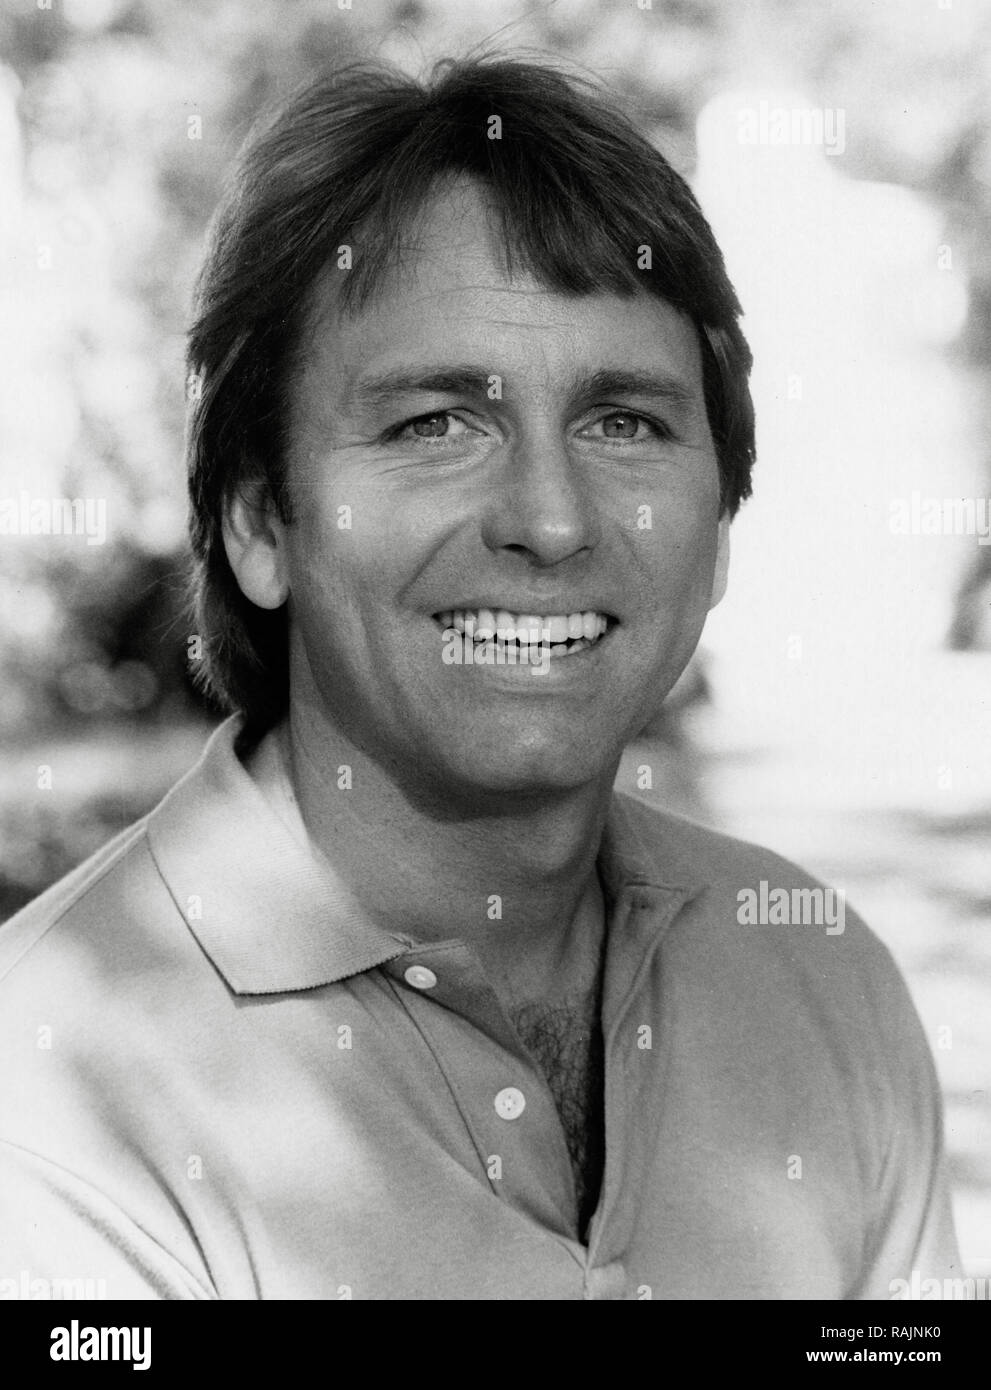 Publicity photo of John Ritter,  circa 1979    File Reference # 33636 909THA Stock Photo